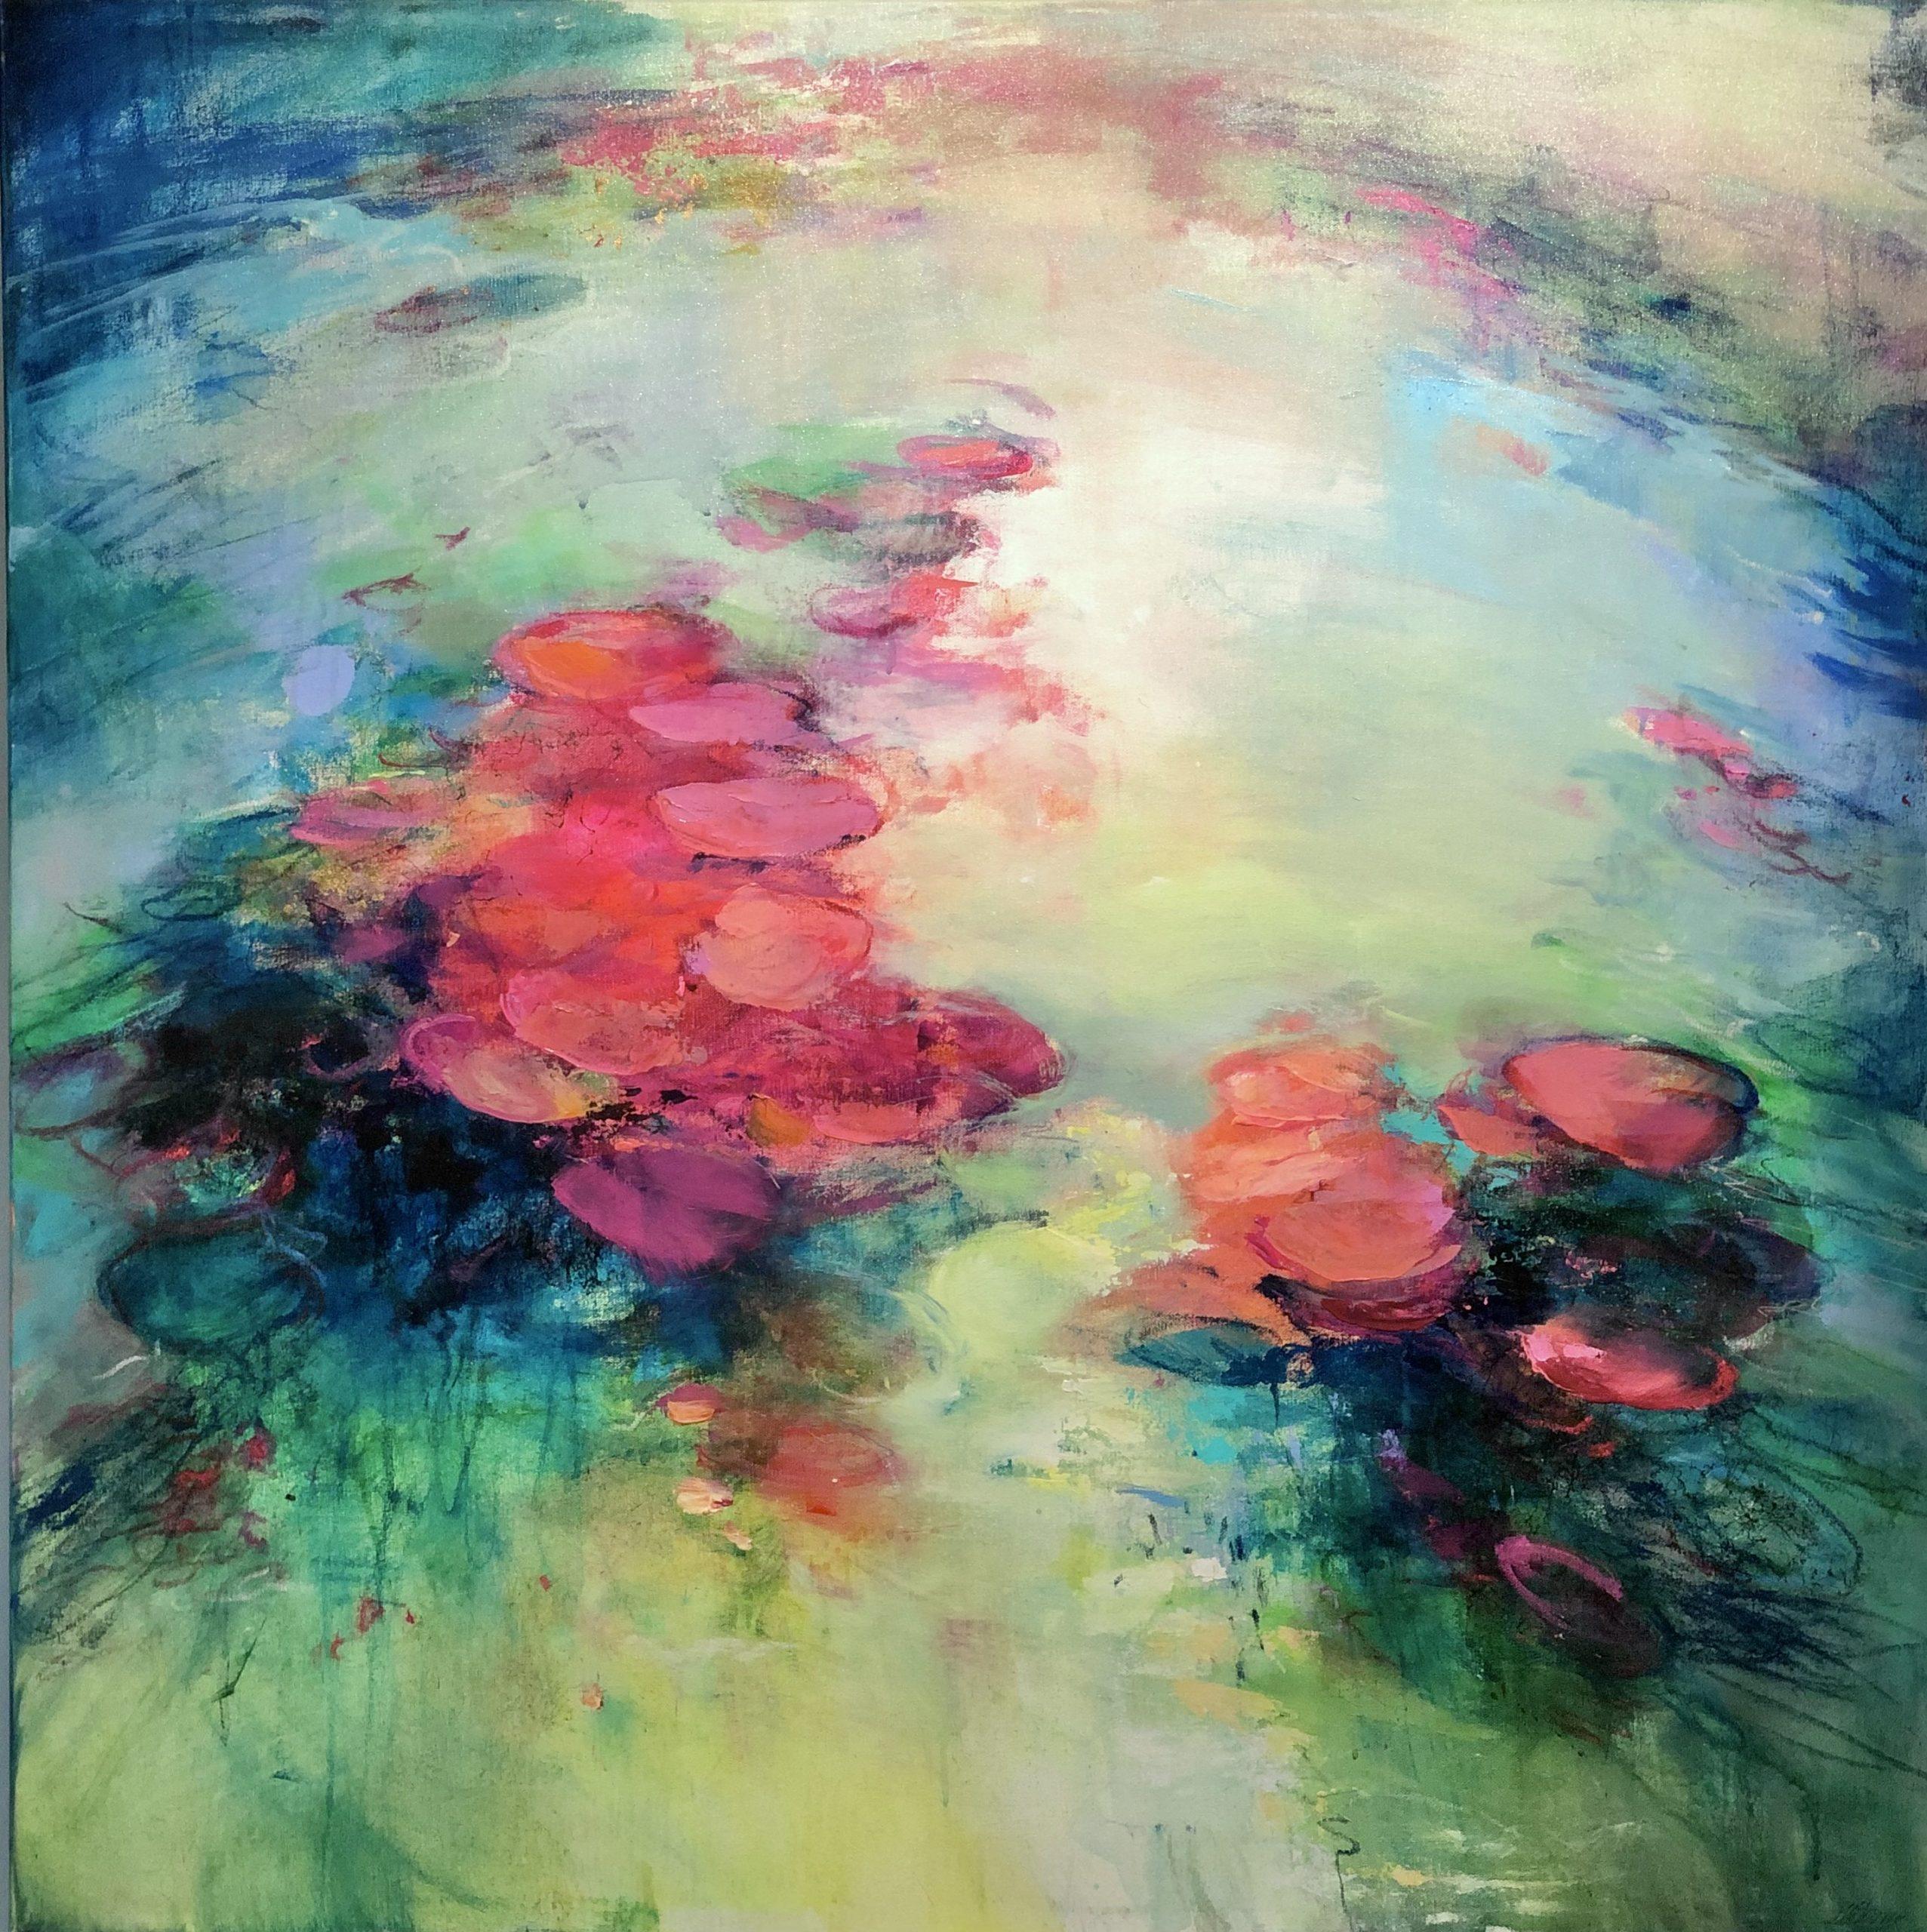 Magdalena Morey Landscape Painting - Out of my depths- original abstract floral waterscape painting - Modern Art